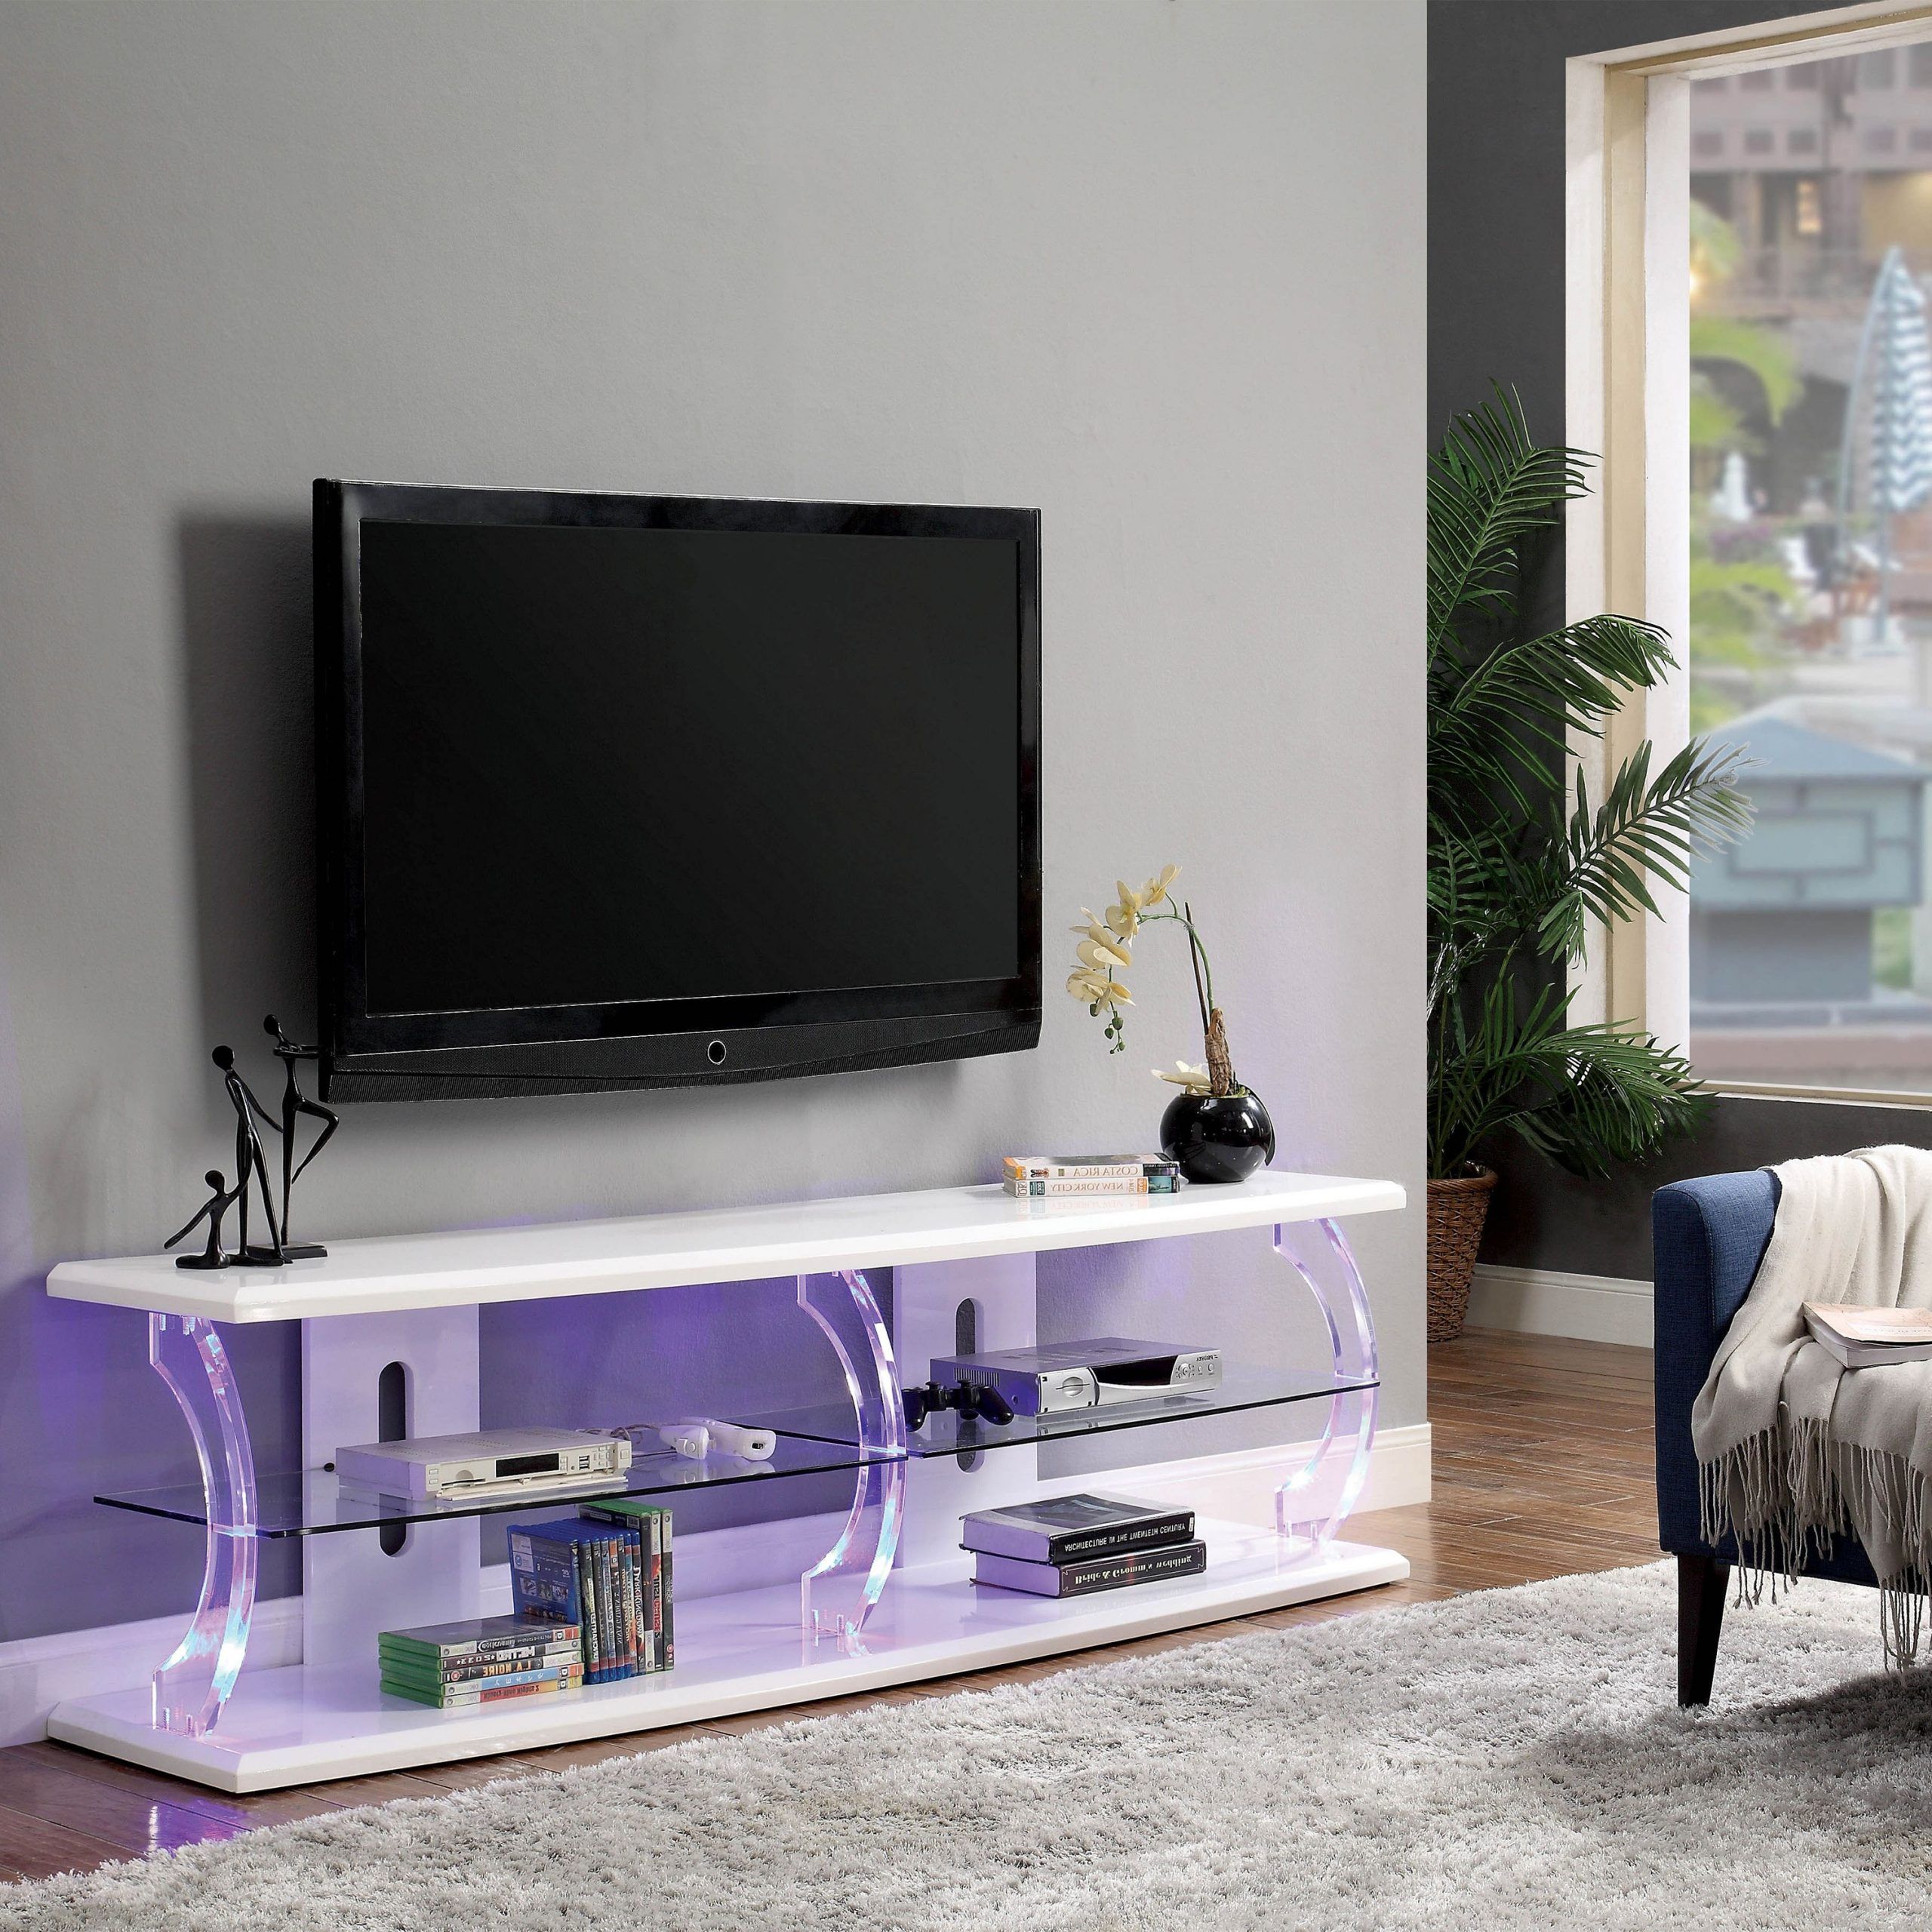 Furniture Of America Daley Modern White 60 Inch Led Tv Throughout Polar Led Tv Stands (View 4 of 20)